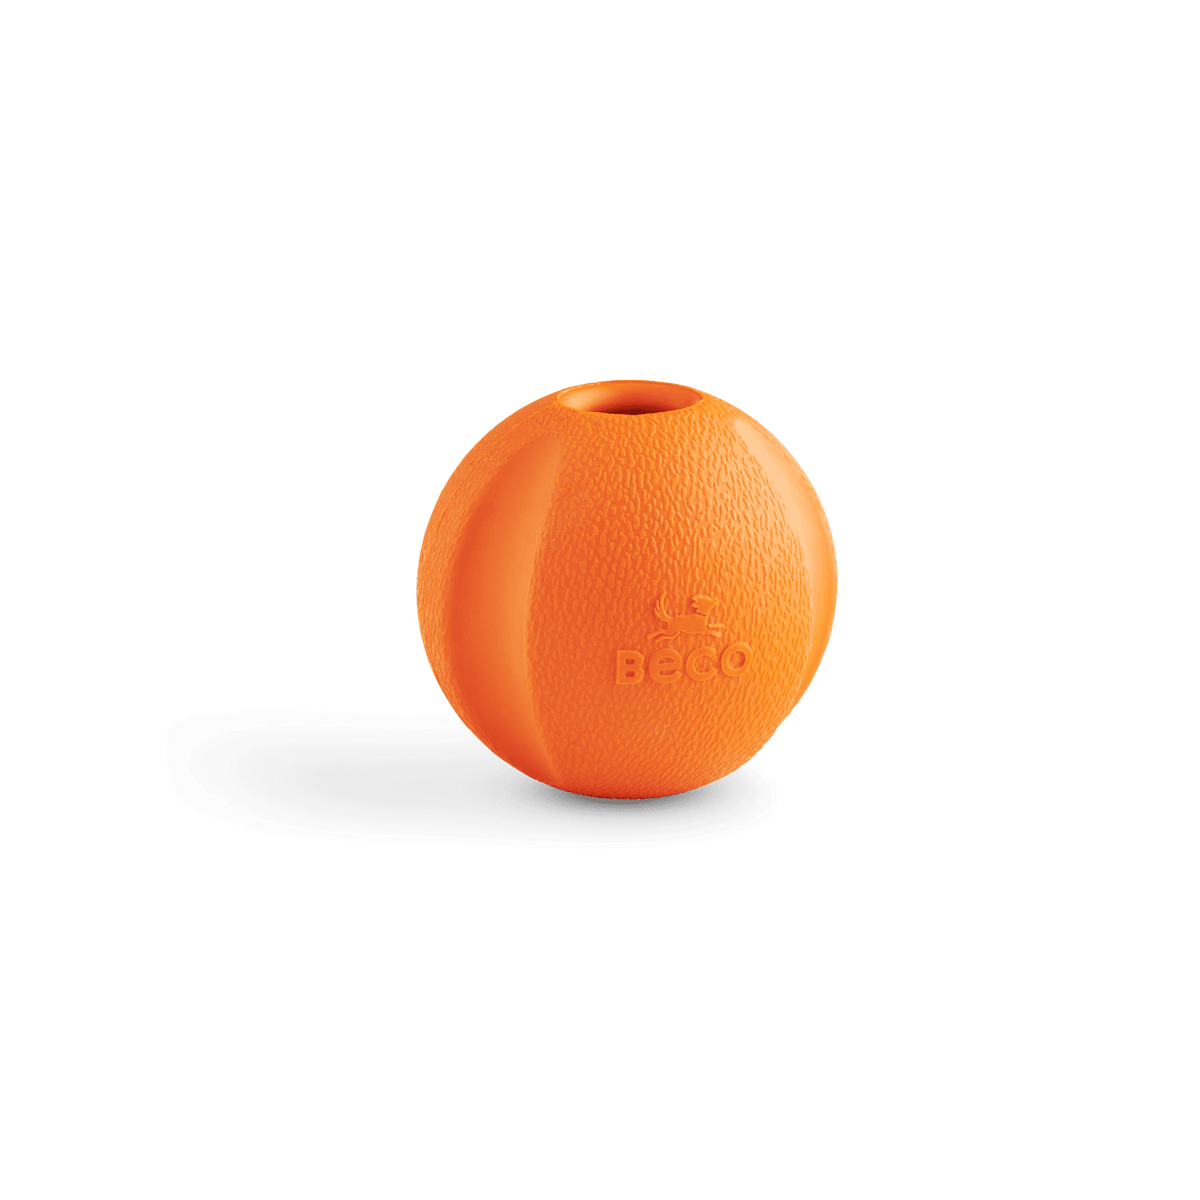 Natural Rubber Fetch Ball  BECO - Love your dog, love our planet